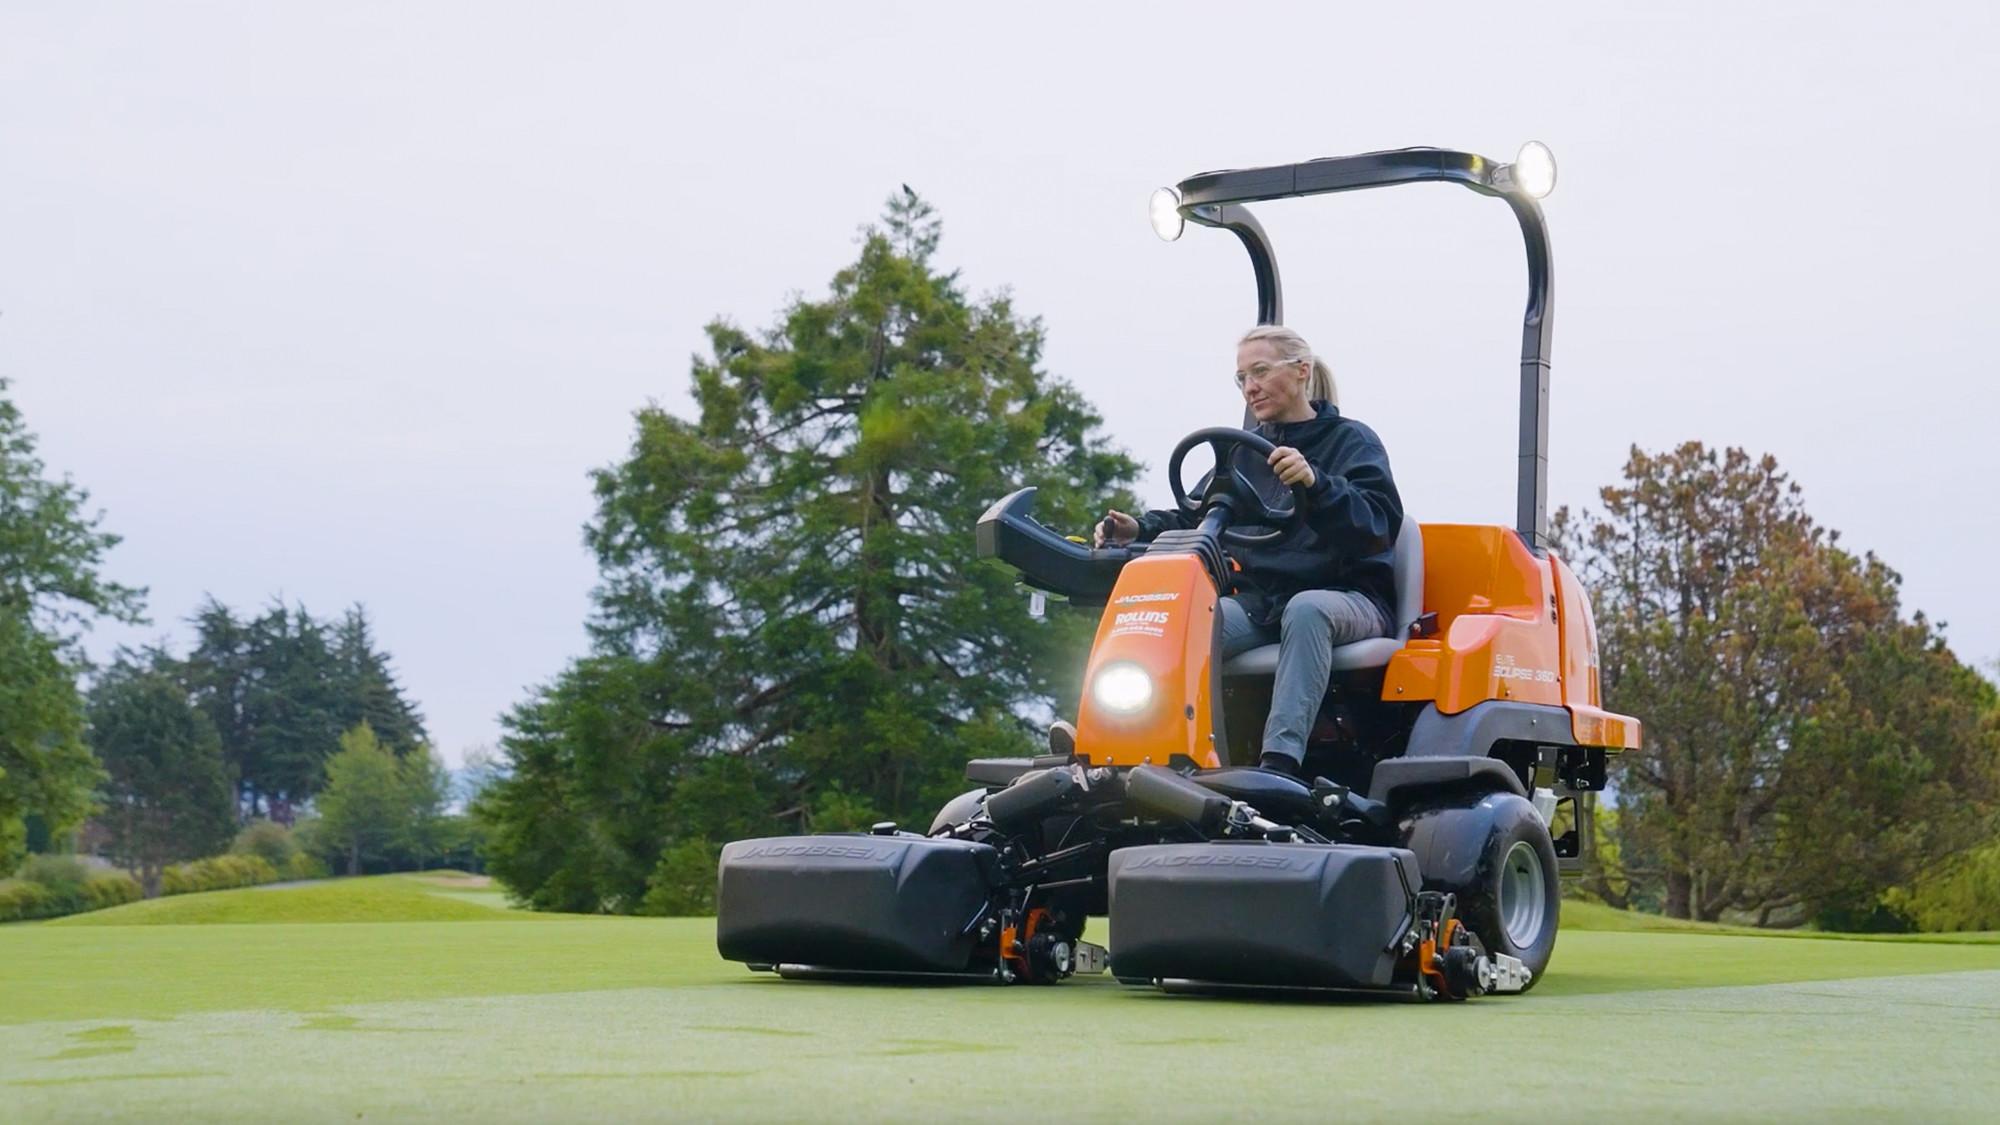 JAKE ELITE LITHIUM MOWER TRUSTED BY CORDOVA BAY GOLF COURSE & ENVIRONMENTAL SANCTUARY